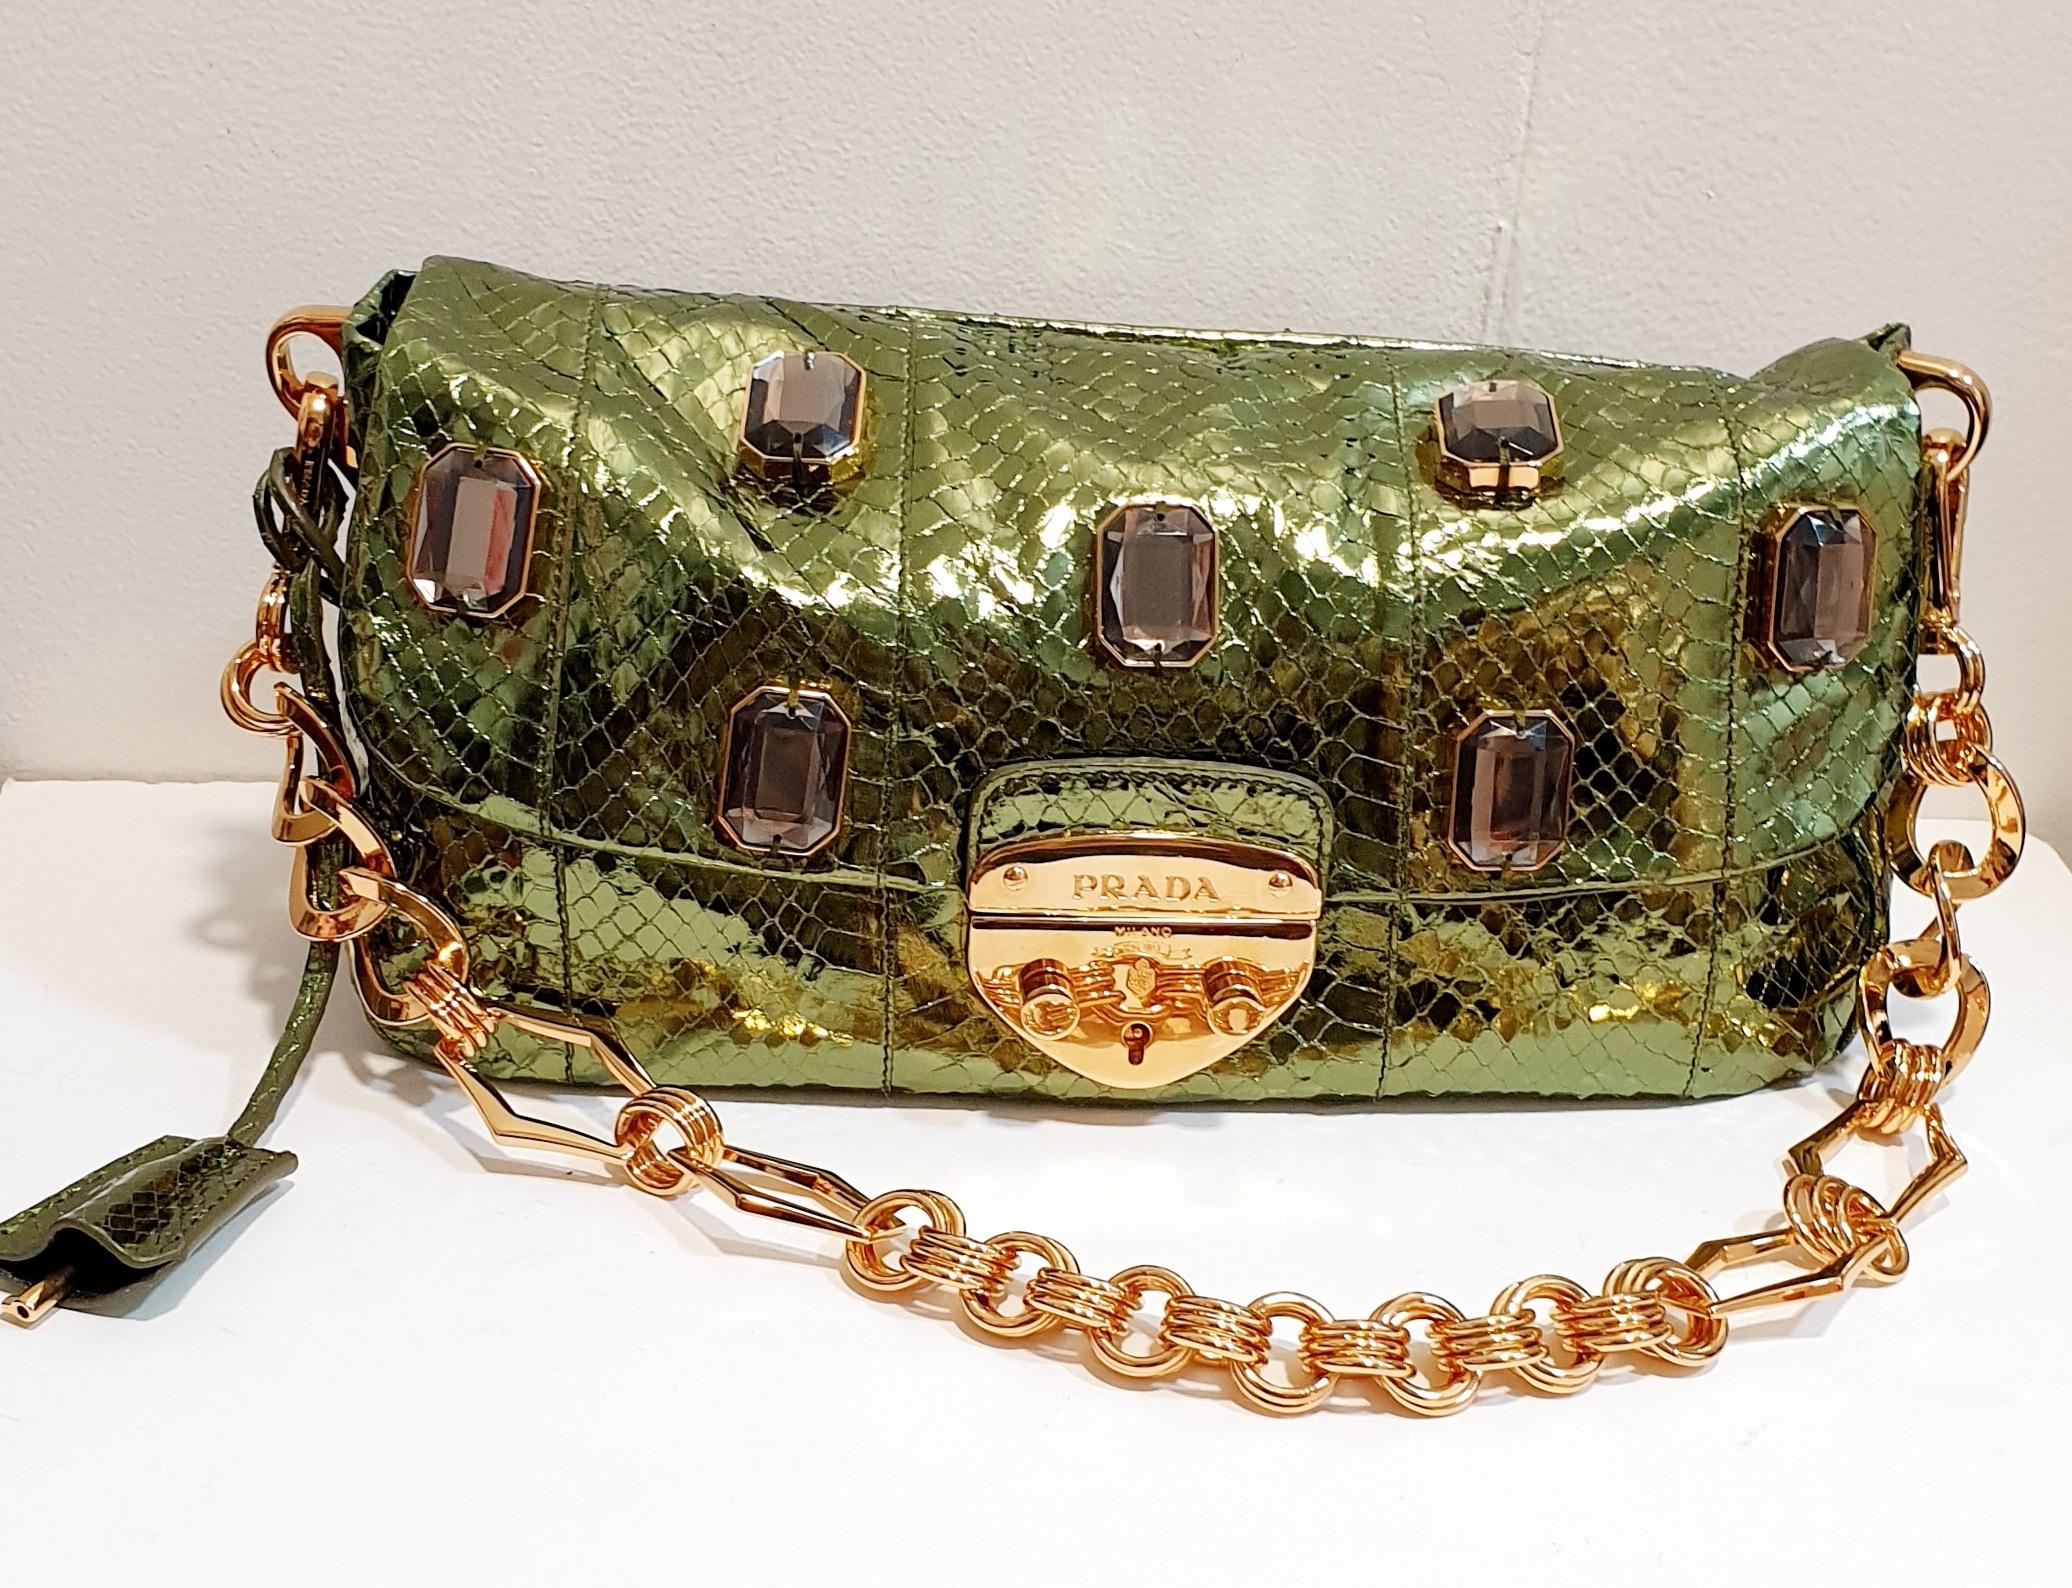 Prada Jeweled  green Phyton clutch bag
Rest of boutique stock
Never used
Original case, bag a papers 
This python leather bag comes in a simple style with embellishments on the front. 
This chic bag opens to a well-lined interior and is held by a